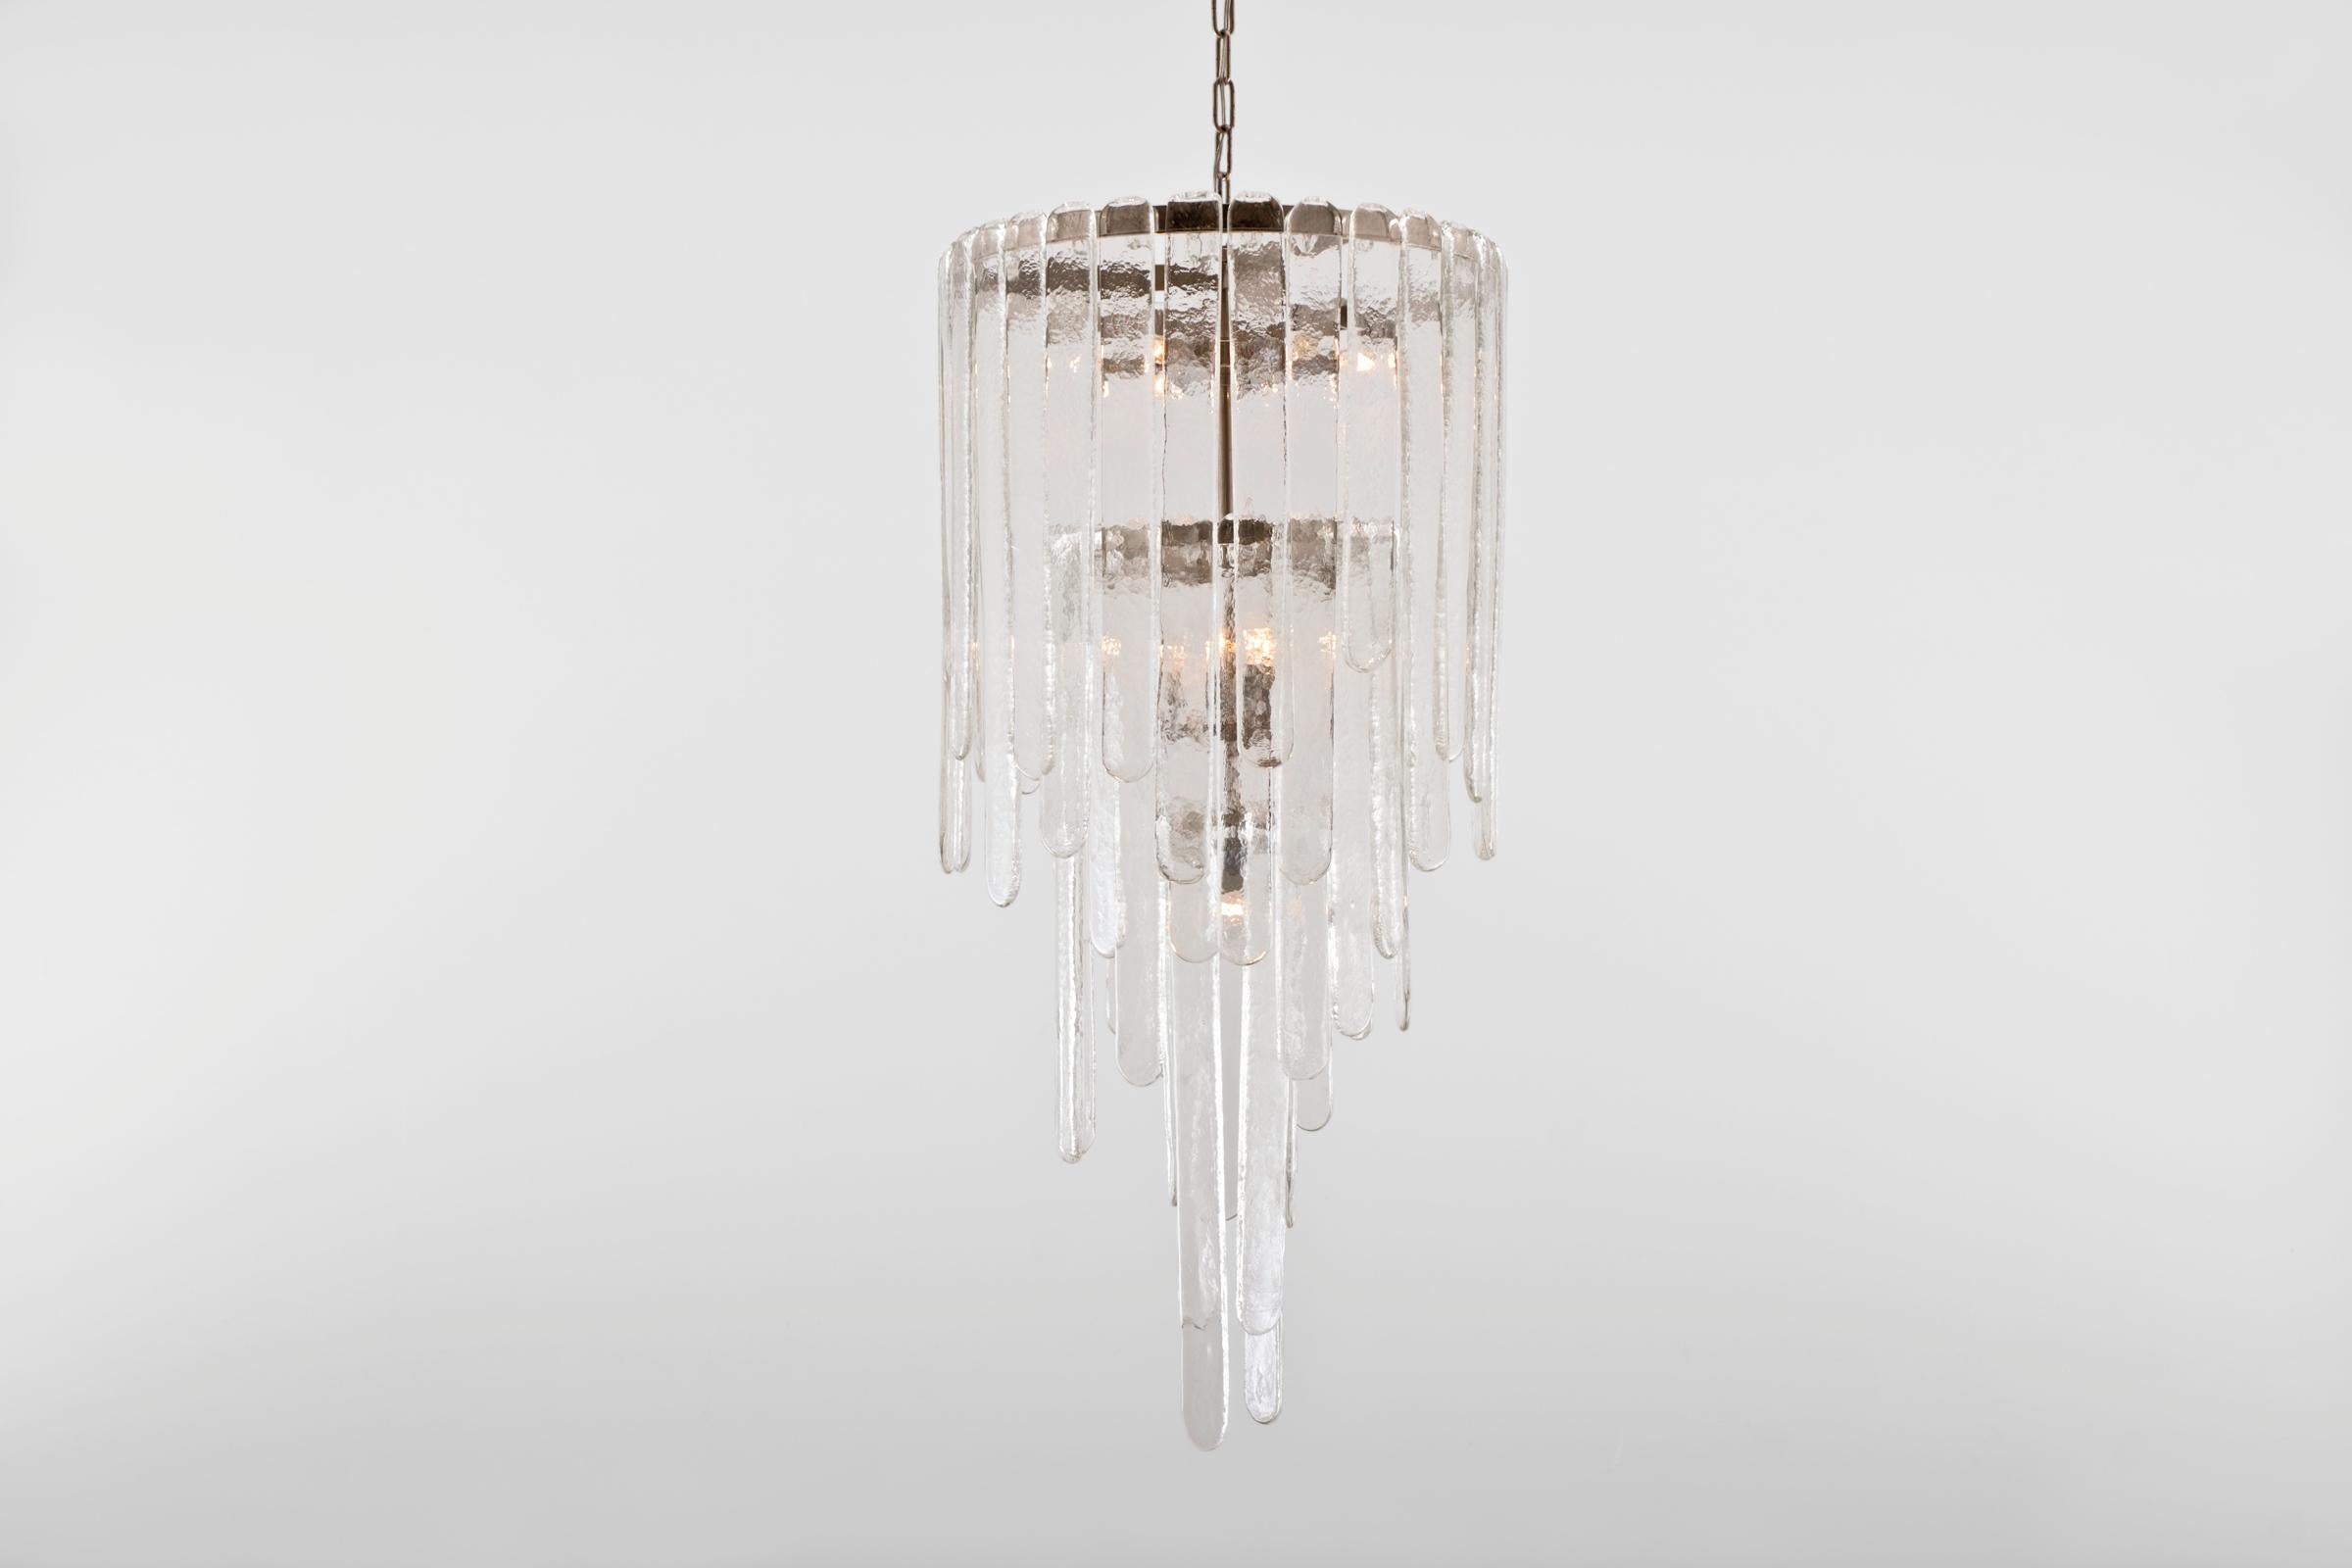 Impressive beautiful composed Murano glass chandelier by Carlo Nason for Mazzega, Italy 1969. The chandelier contains 58 clear artistic glass pieces with a nice structure. The glass pieces comes in 3 lengths: 21 large, 21 middle and 16 smaller